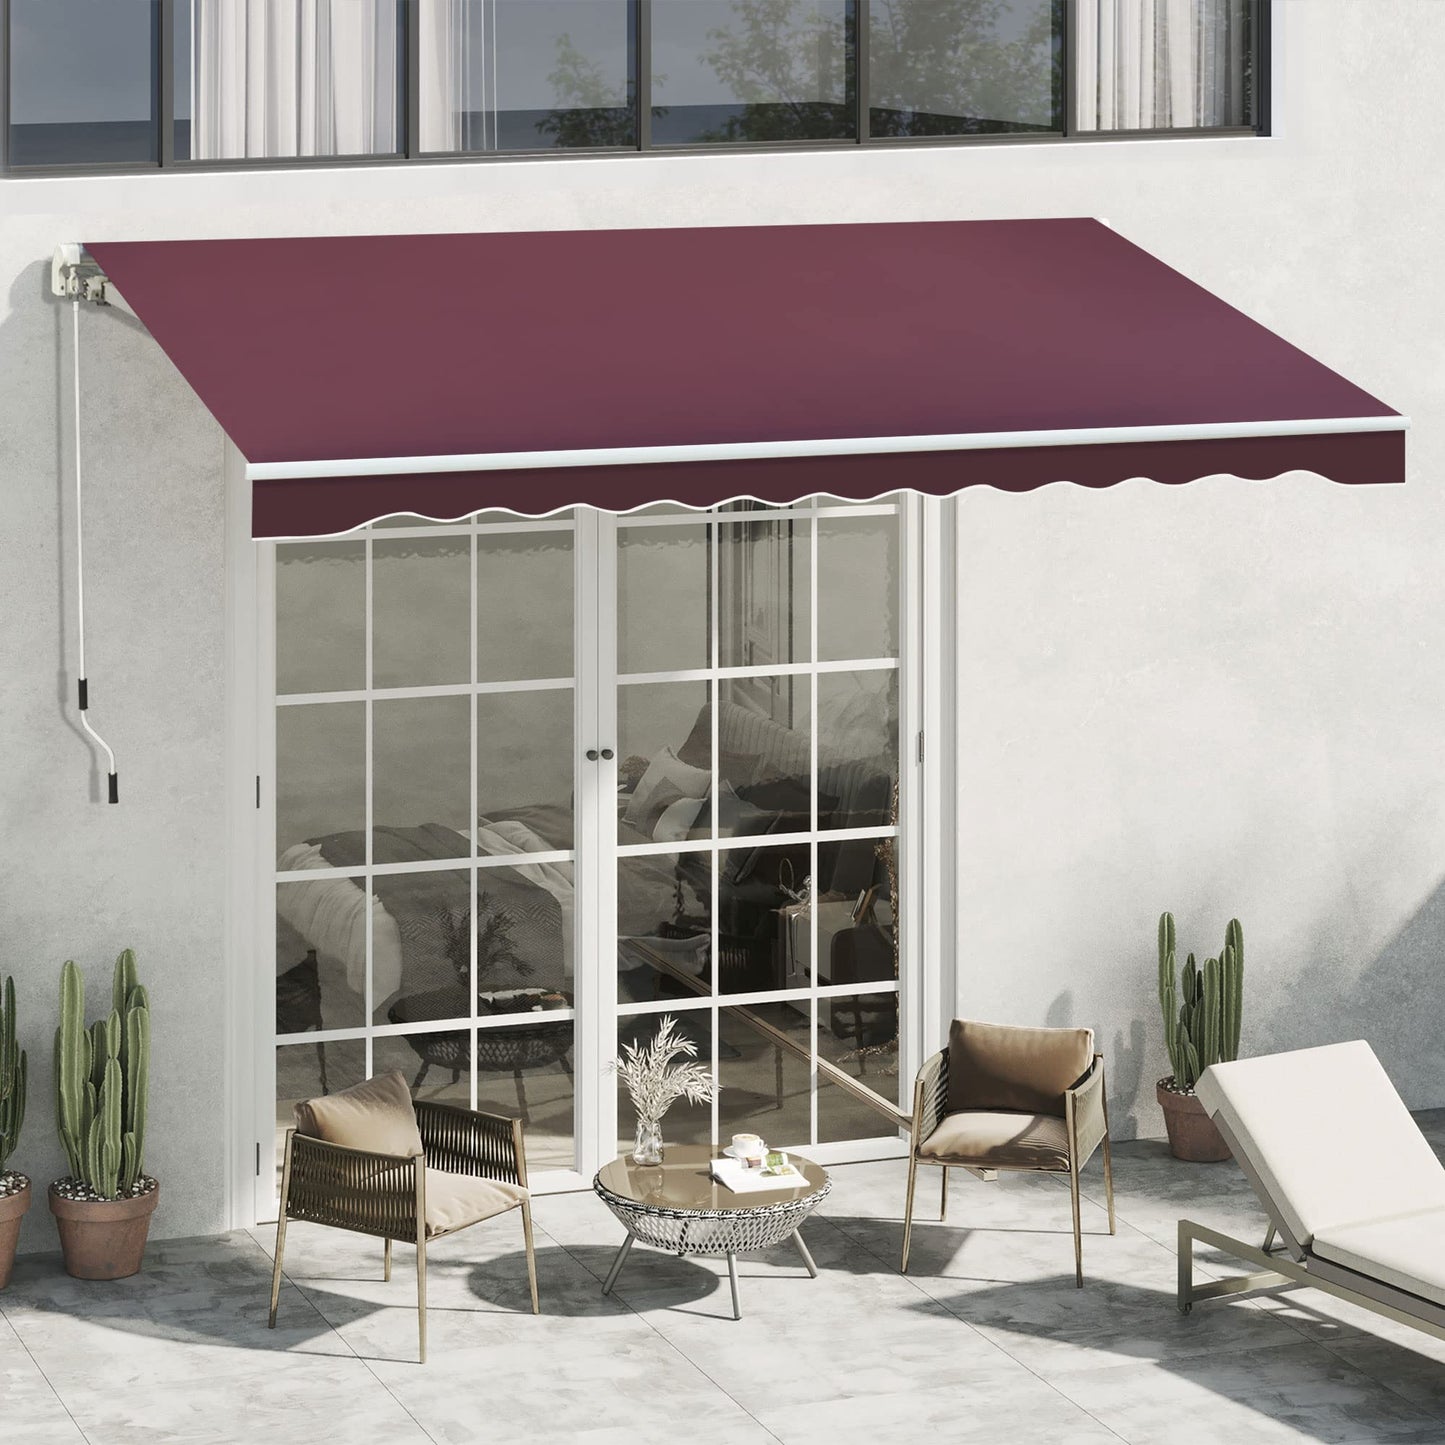 Outdoor Retractable Patio Awning Canopy for Window and Door